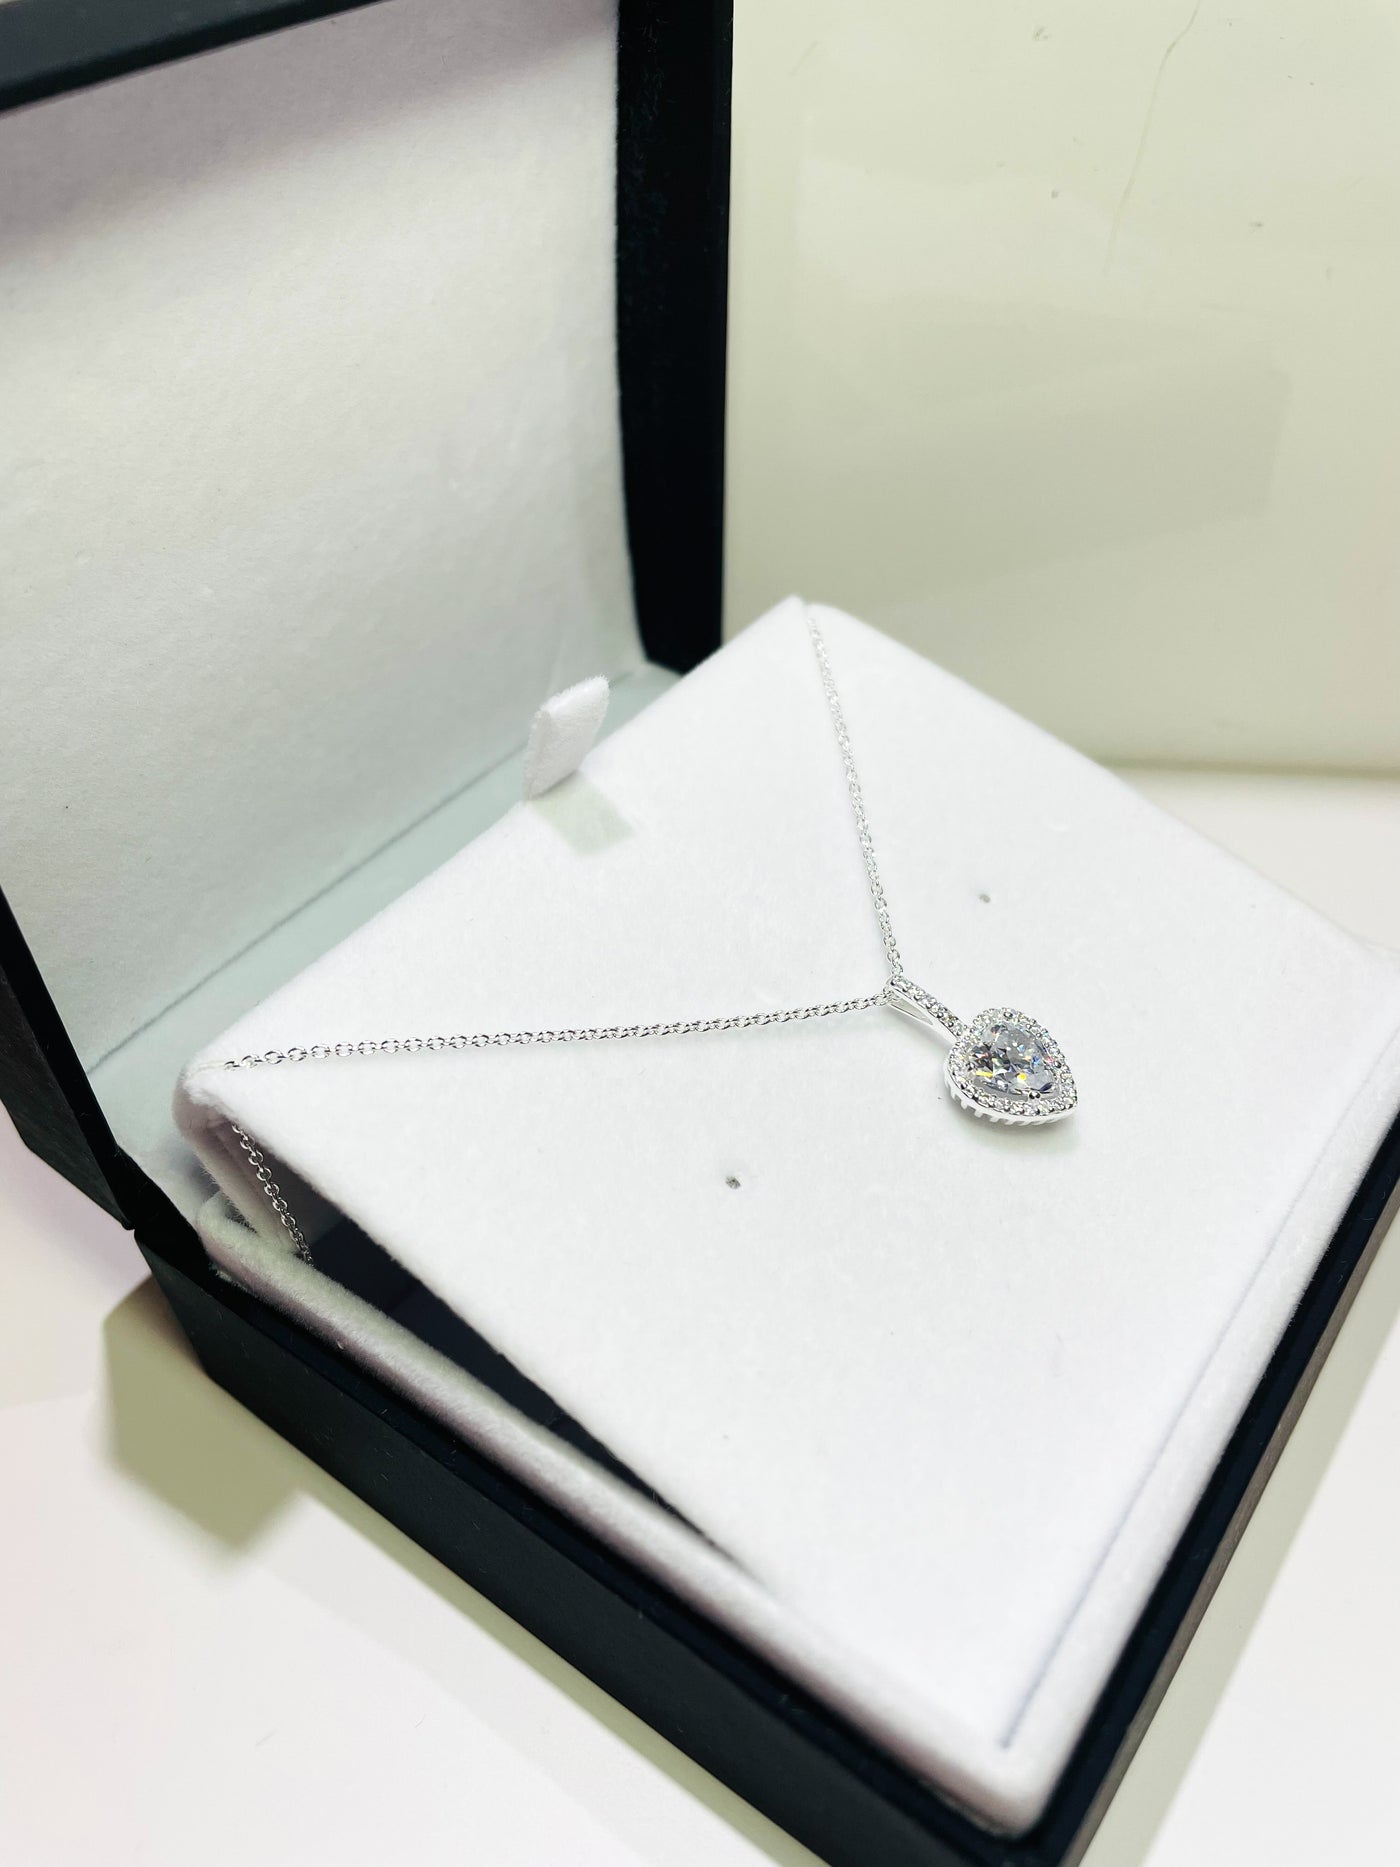 Crystal Halo Heart Necklace